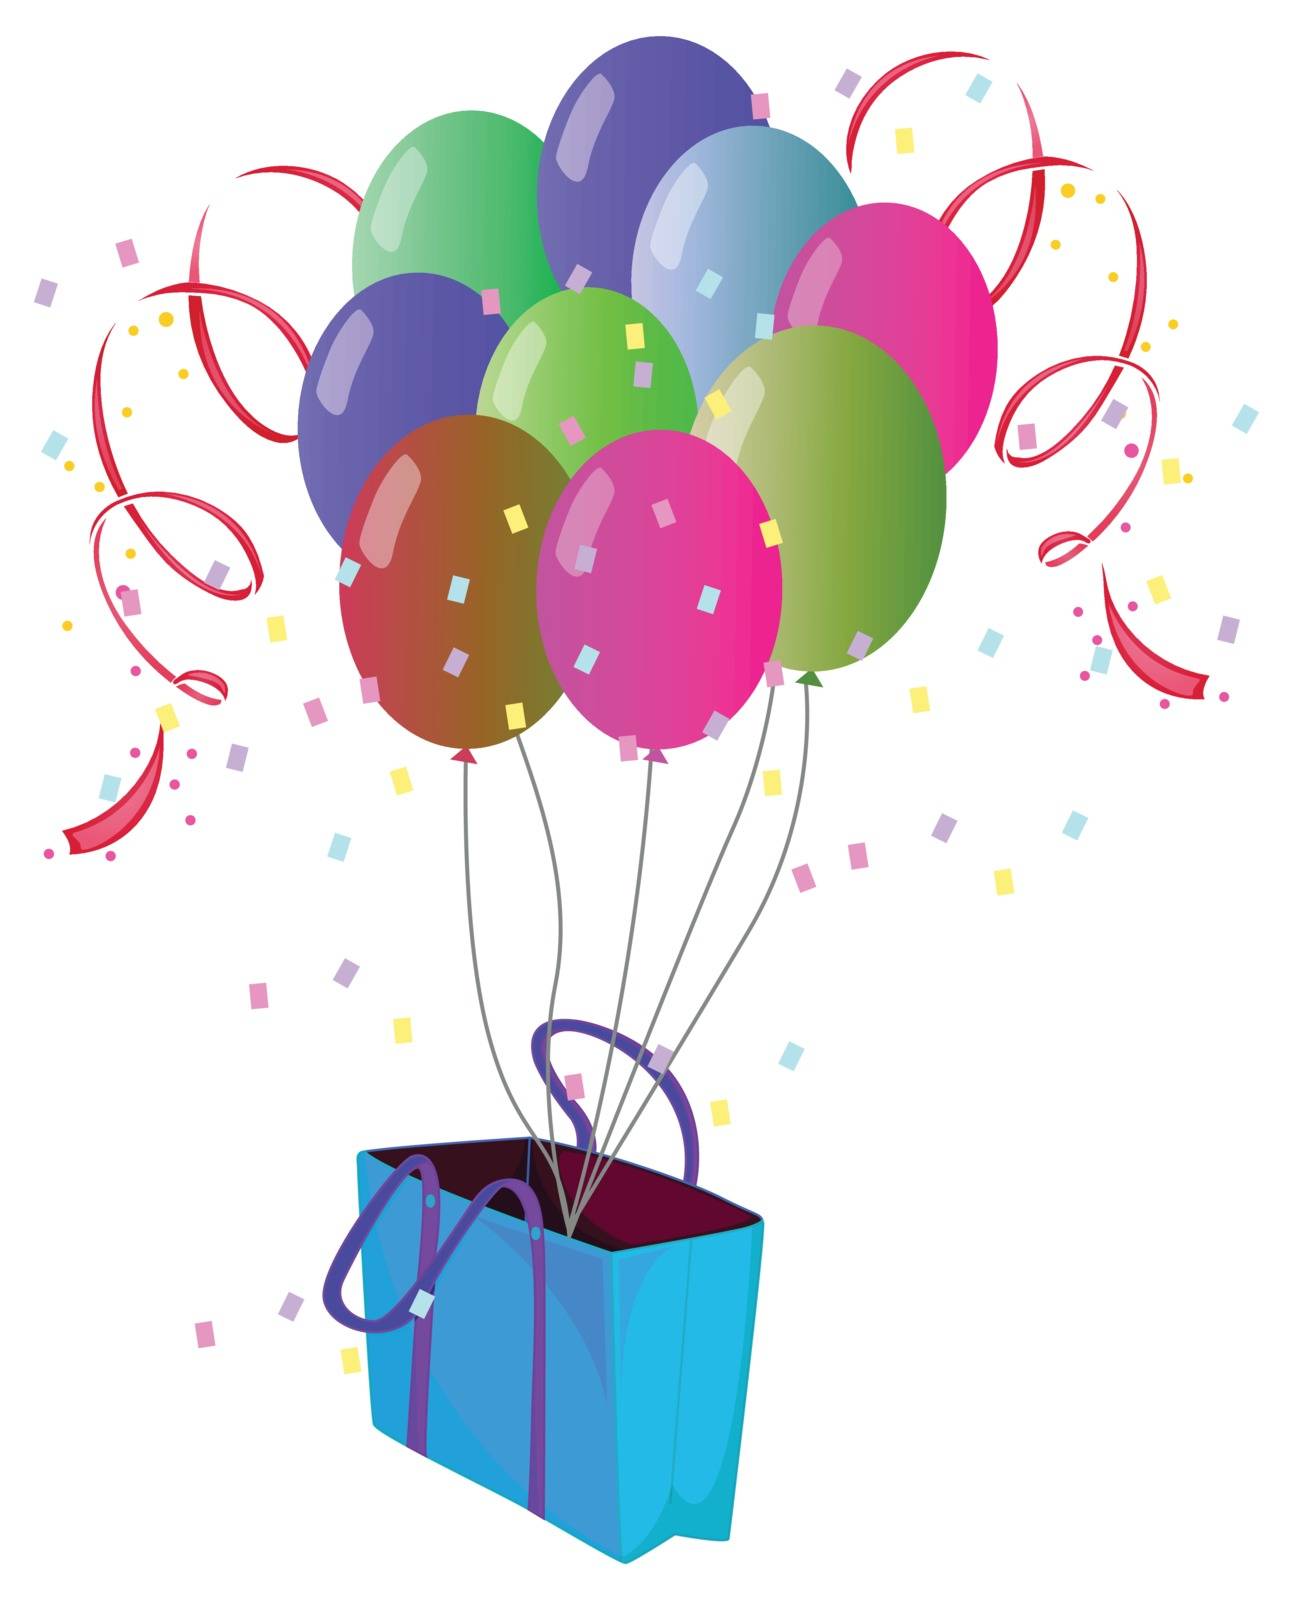 Illustration of a paper bag with balloons on a white background